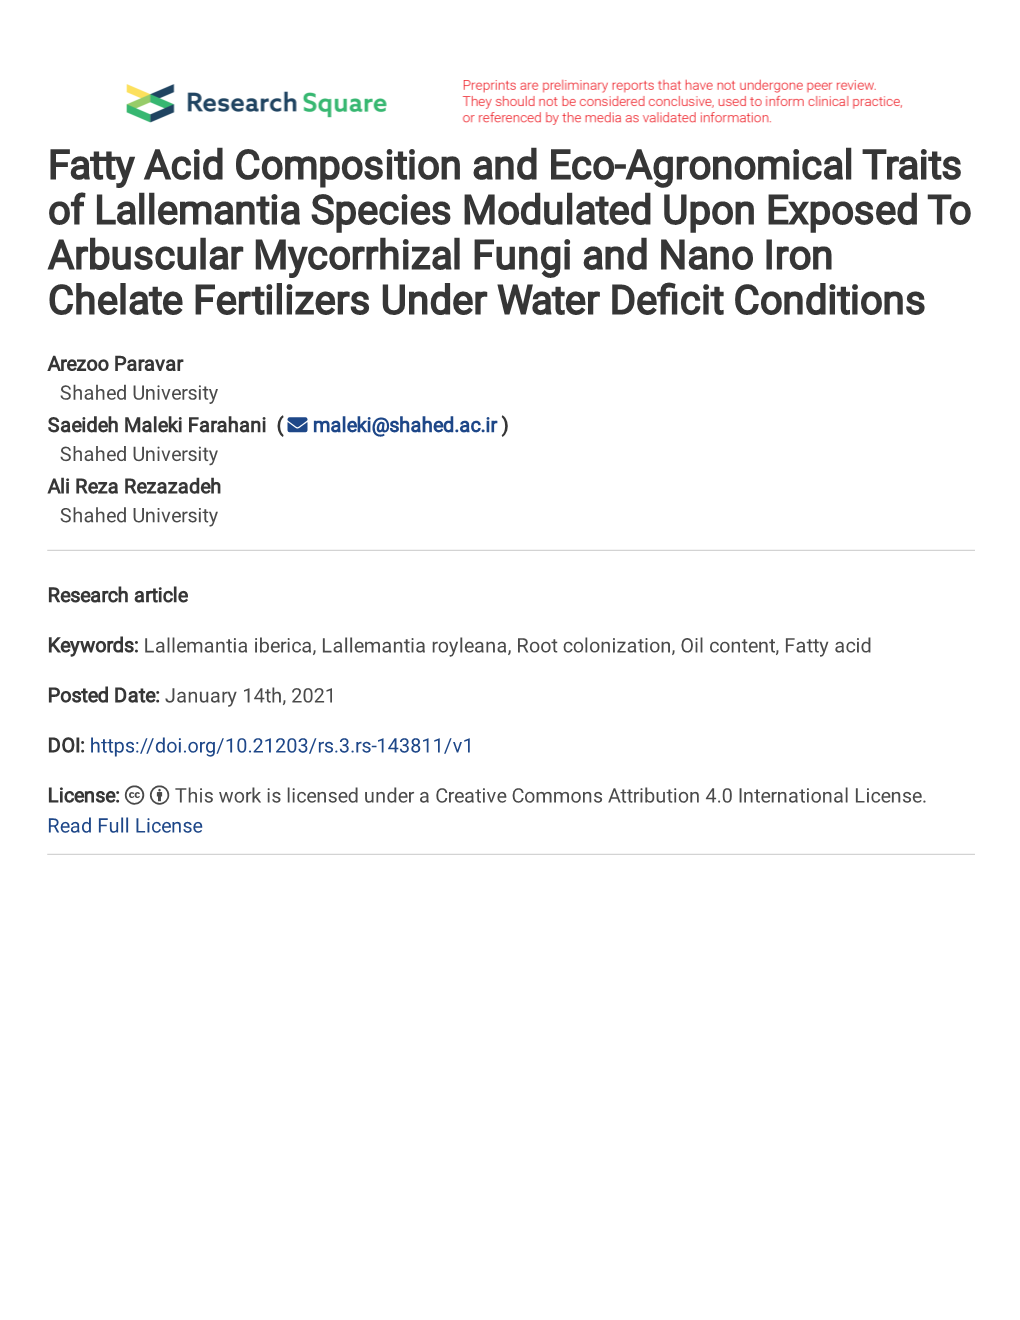 Fatty Acid Composition and Eco-Agronomical Traits of Lallemantia Species Modulated Upon Exposed to Arbuscular Mycorrhizal Fungi